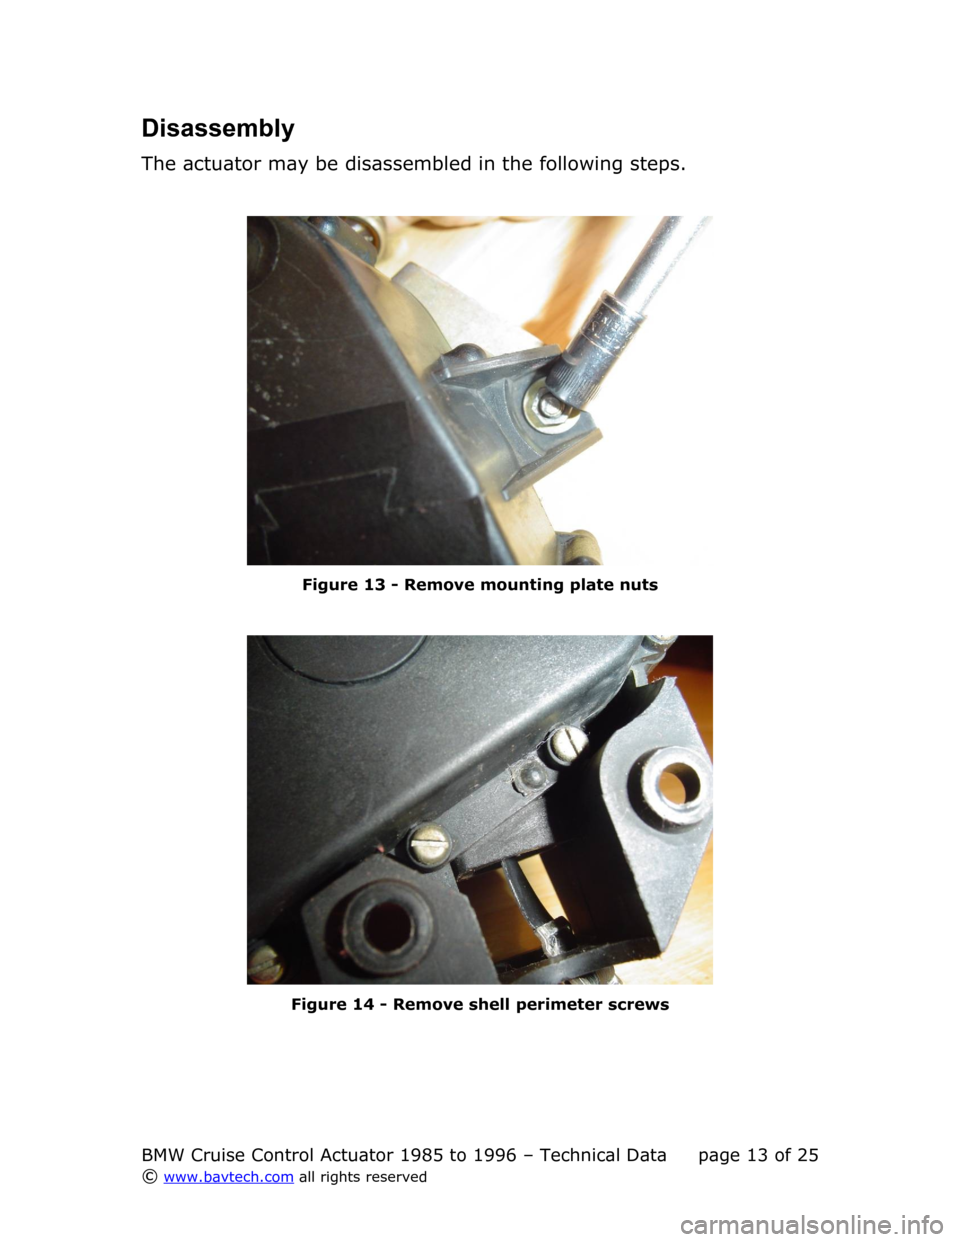 BMW 3 SERIES 1990 E36 Cruise Control Acutator Disassembly
The actuator may be disassembled in the following steps.
Figure  13  - Remove mounting plate nuts
Figure  14  - Remove shell perimeter screws
BMW Cruise Control Actuator 1985 to 1996 – T